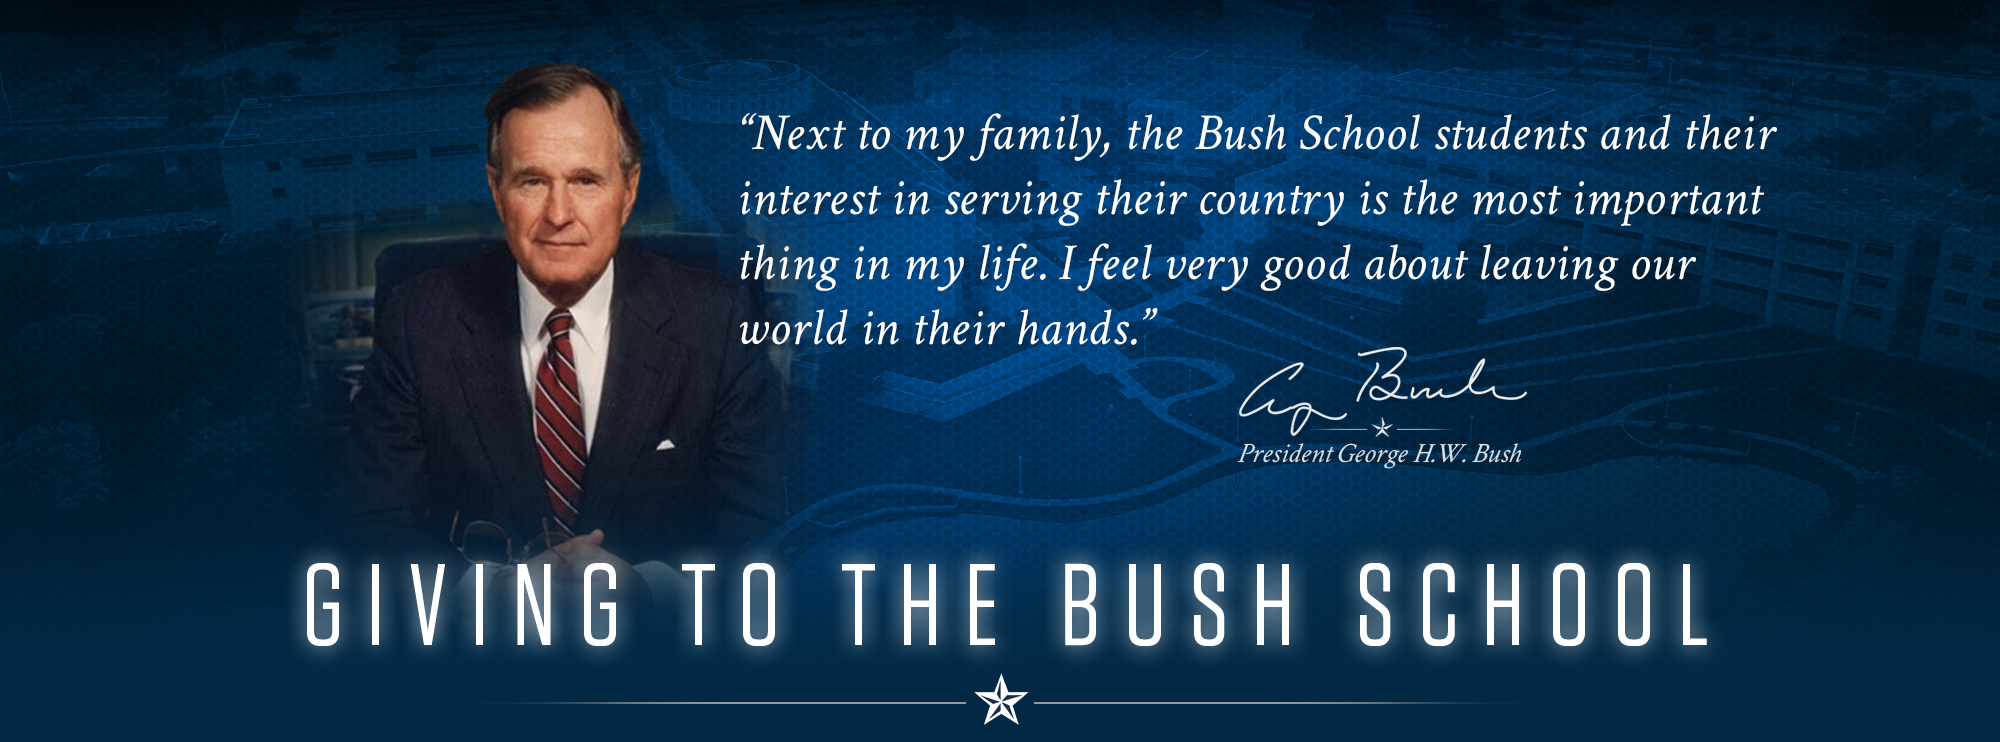 “Next to my family, the Bush School students and their interest in serving their country is the most important thing in my life. I feel very good about leaving our world in their hands.” - President George H.W. Bush